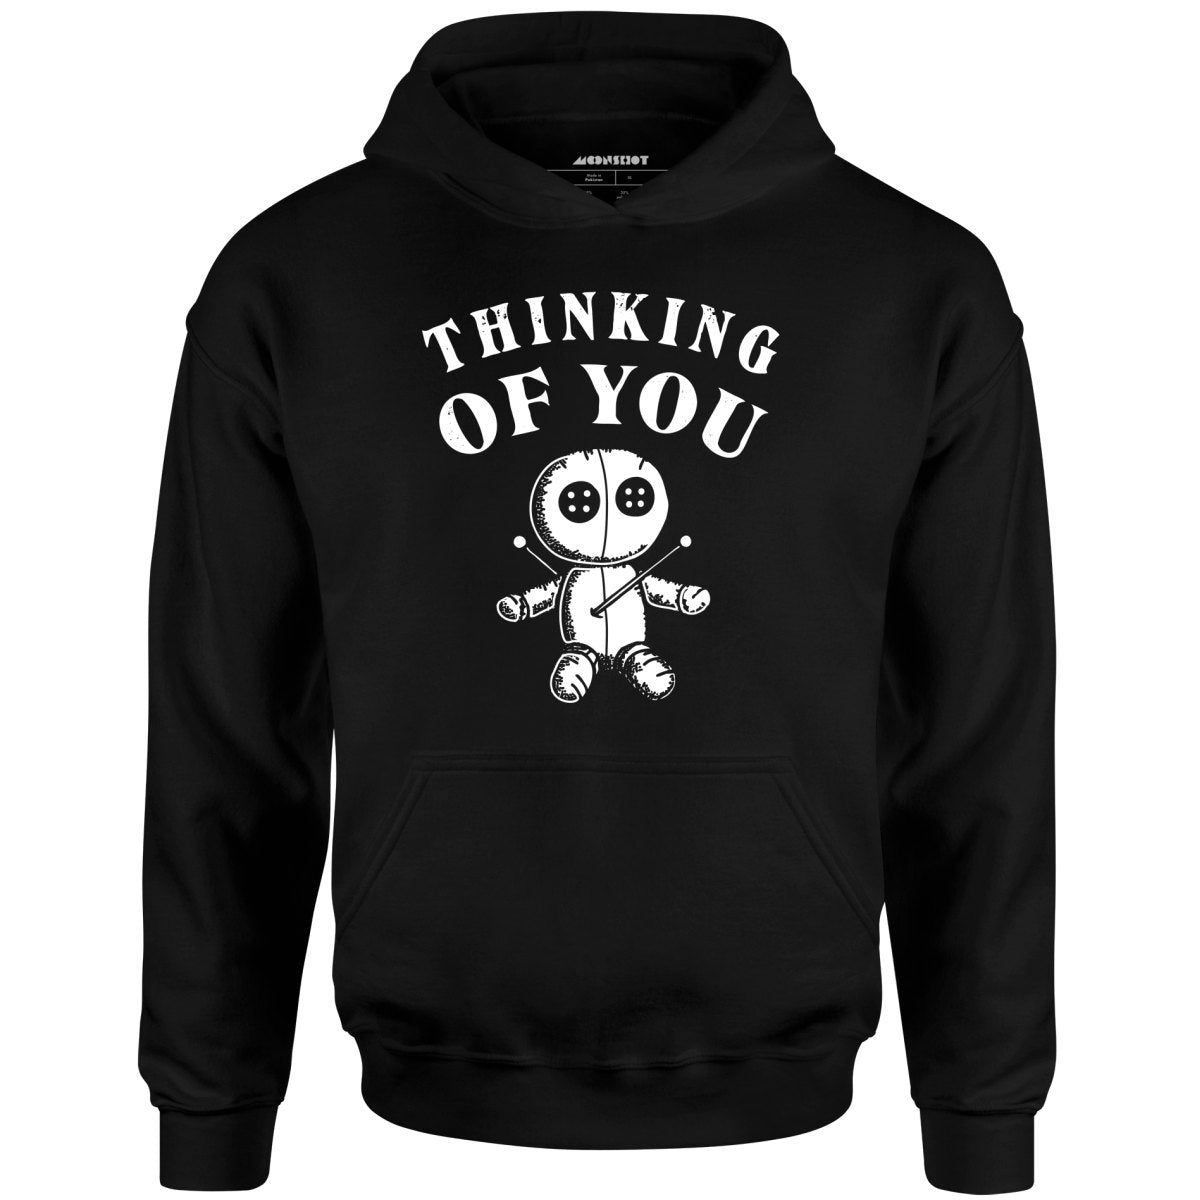 Thinking of You. - Unisex Hoodie